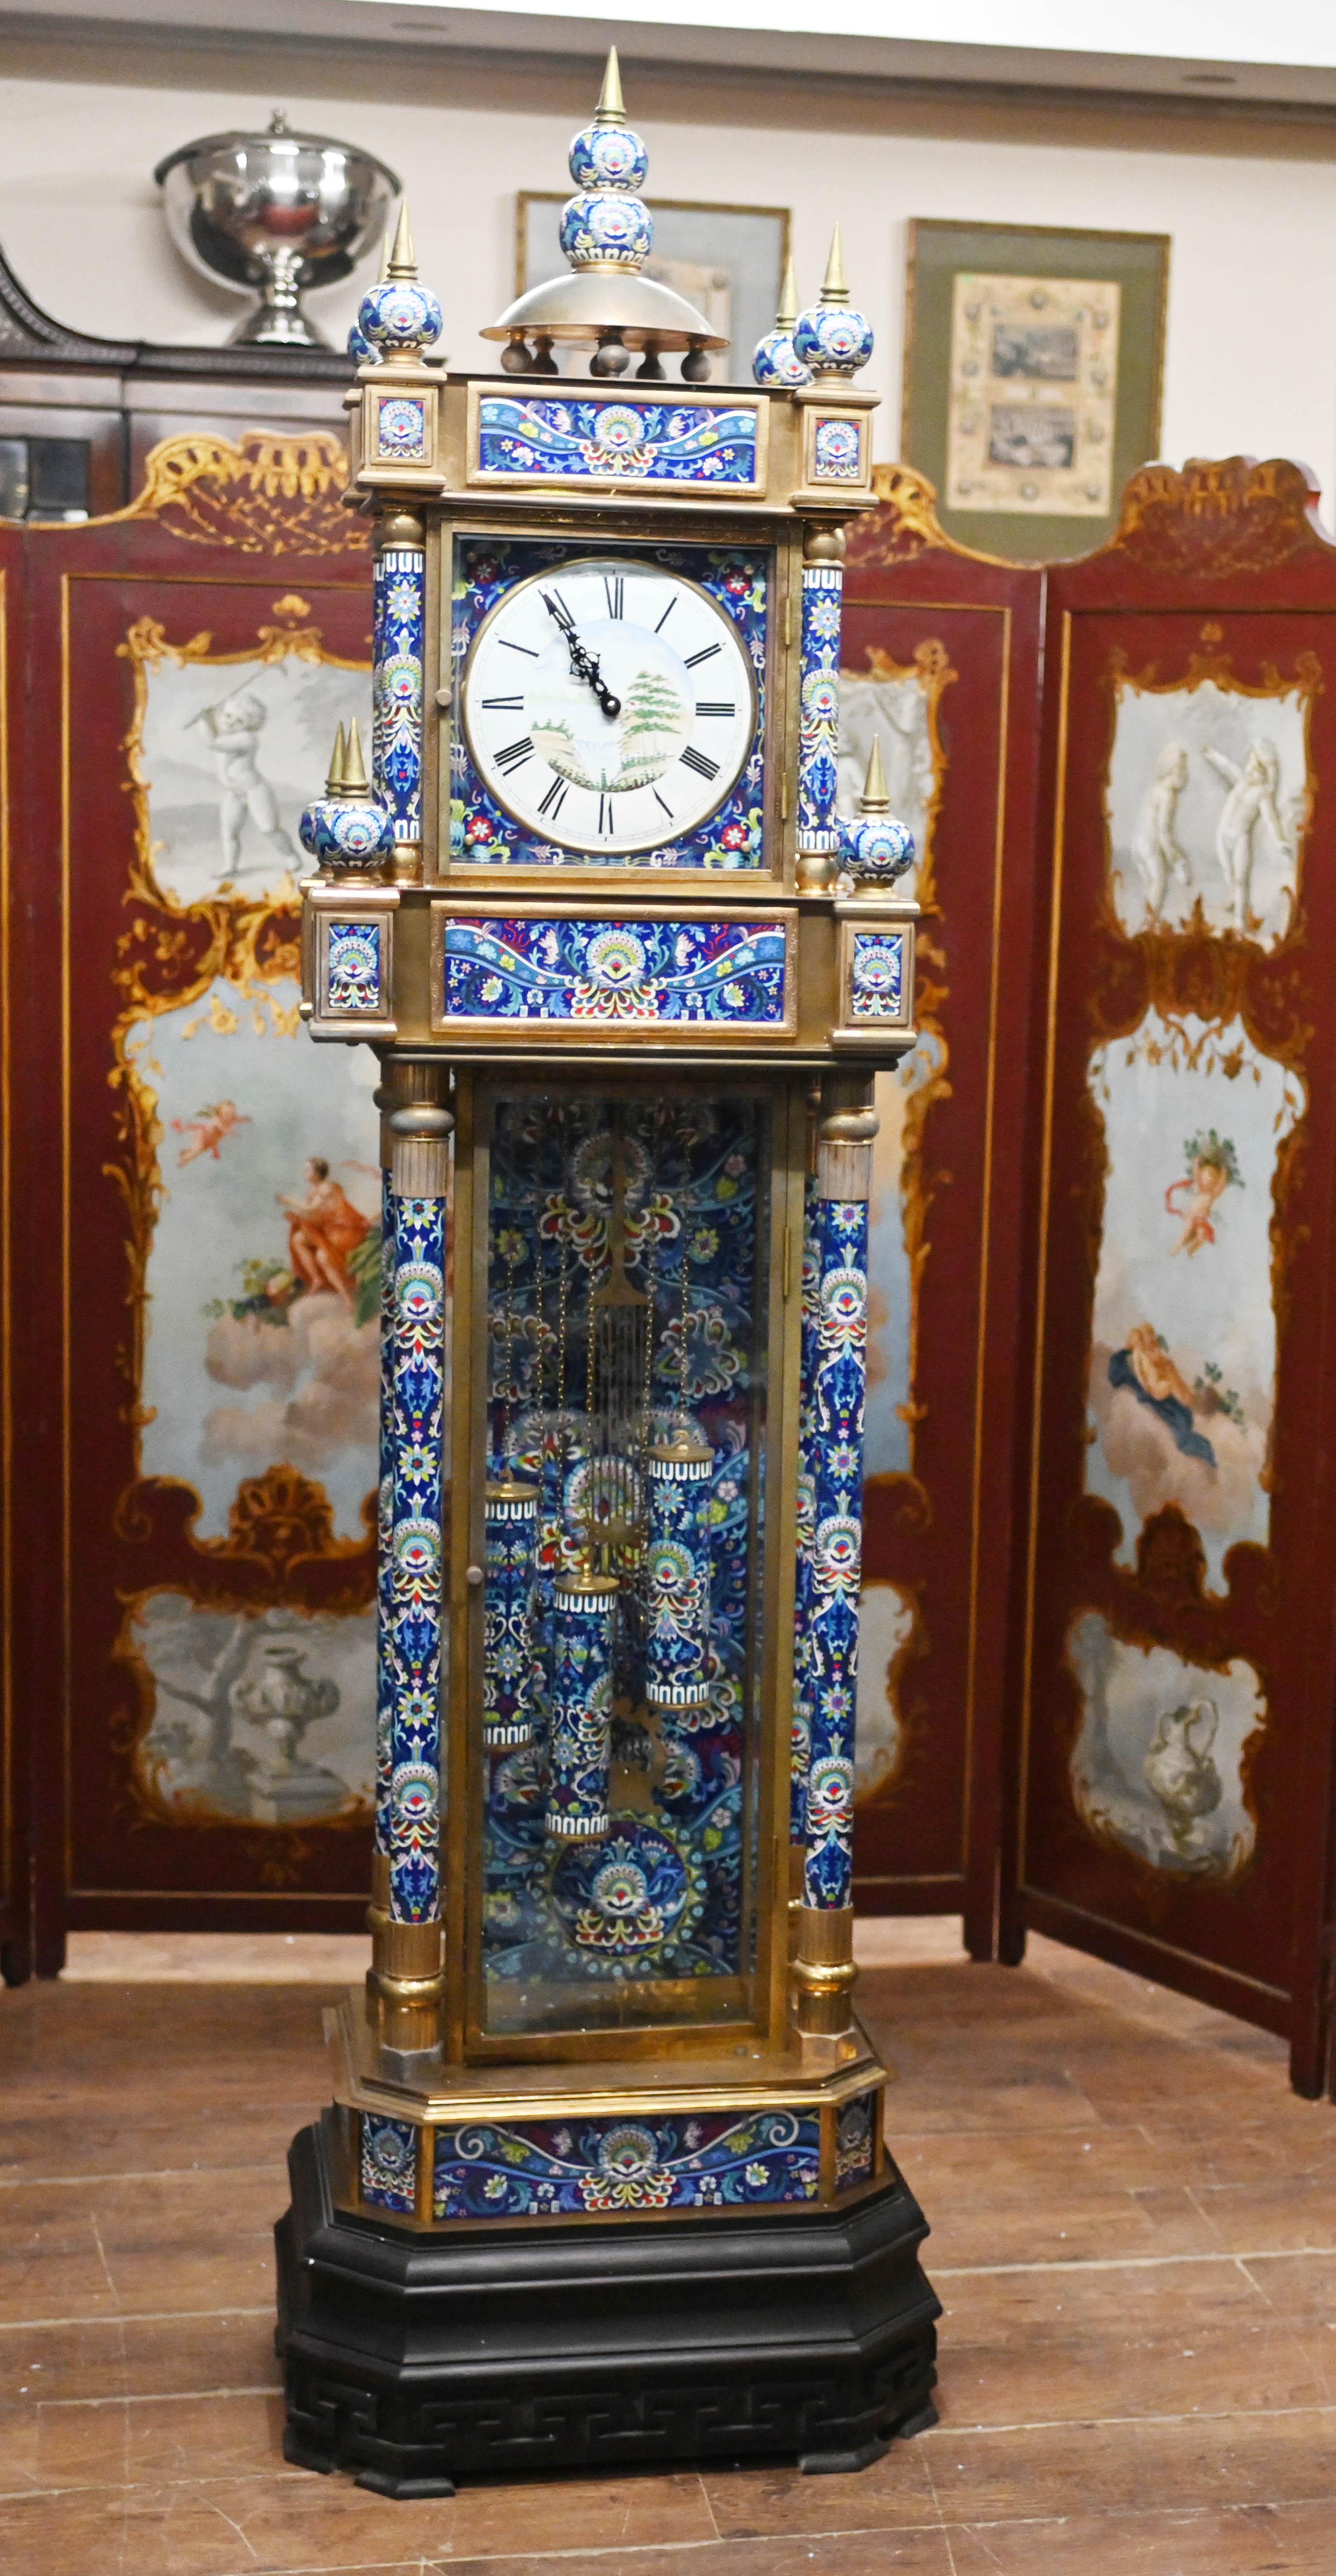 Gorgeous antique French grandfather clock which is highly decorated with Cloisonne work
Hopefully the photos will do this work of art some justice, definitely better in the flesh
Features and abundance of intricate Cloisonne work on all surfaces to